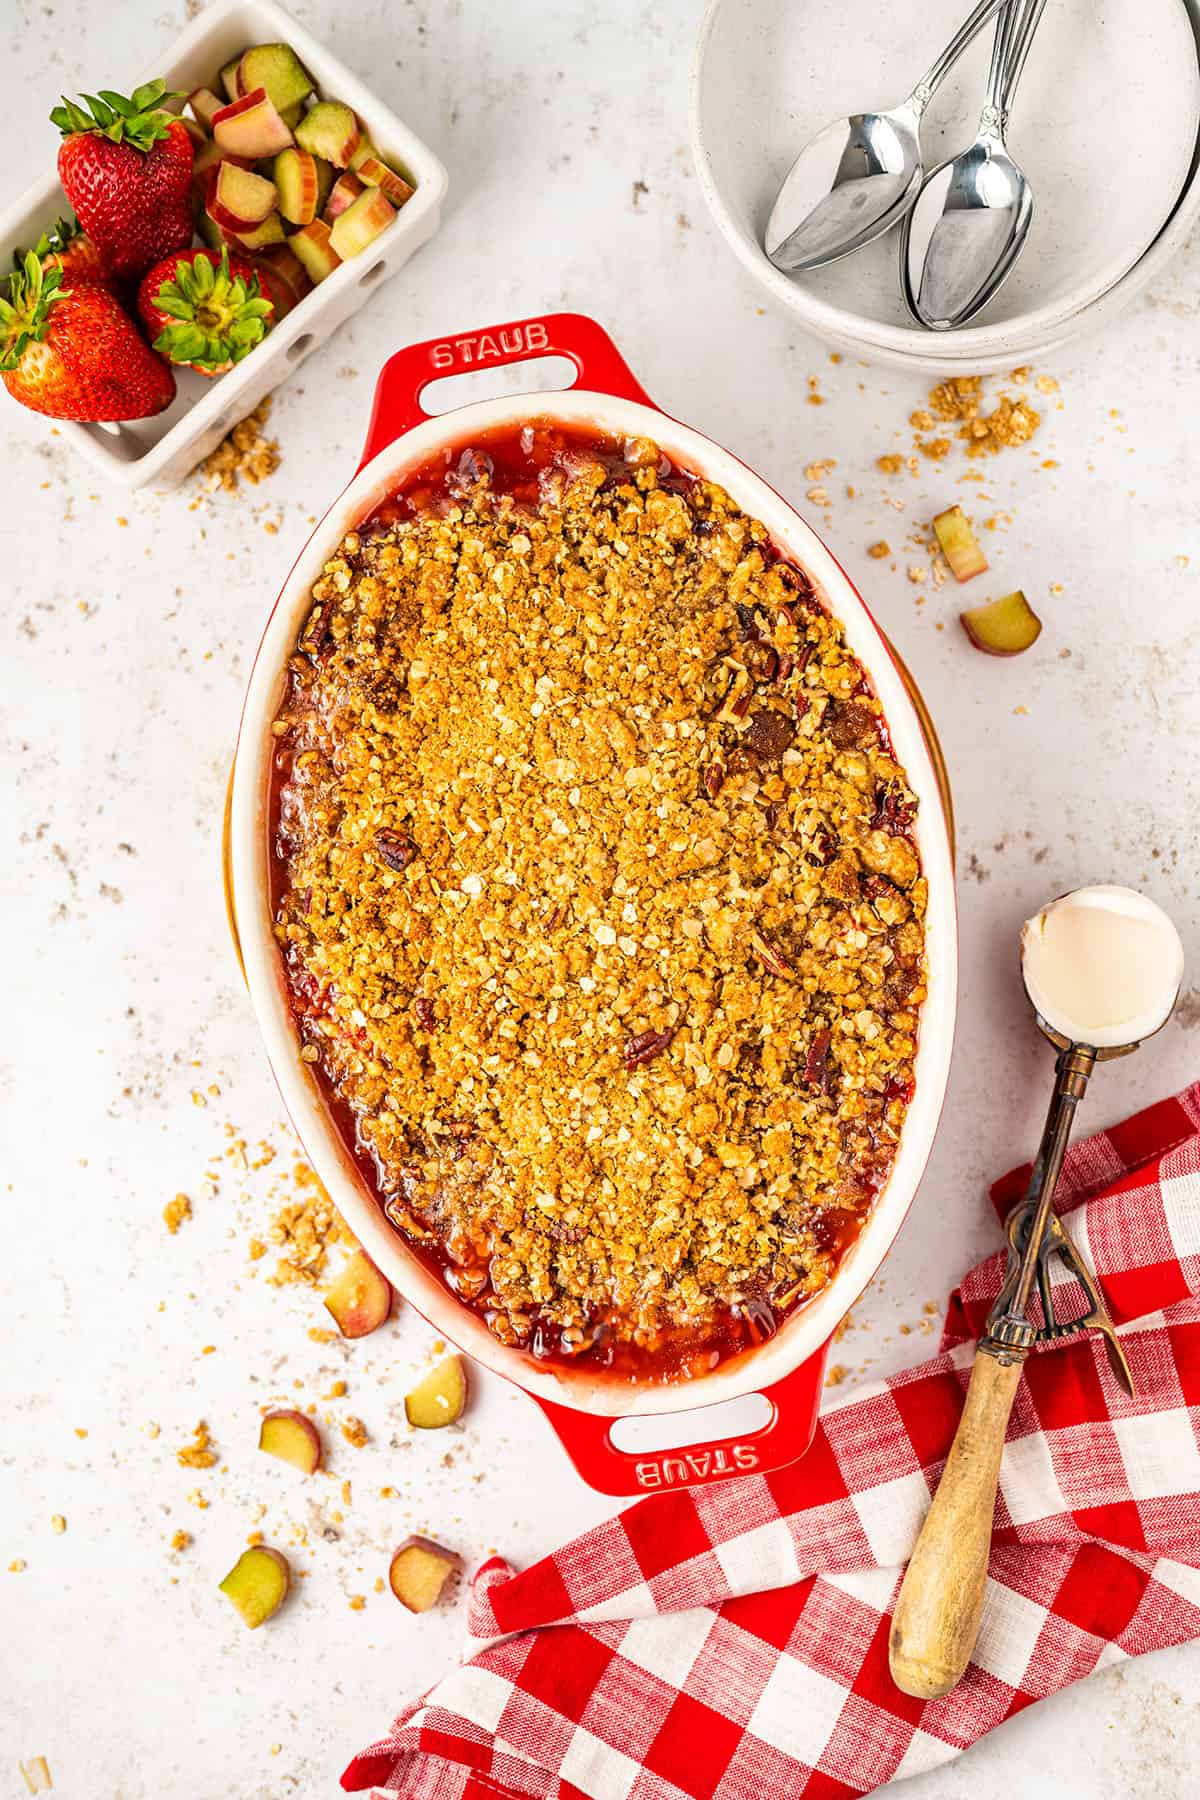 Baked strawberry rhubarb crisp in a baking dish, on a white counter surrounded by a red and white checked cloth, fresh strawberries, and an ice cream scoop. 